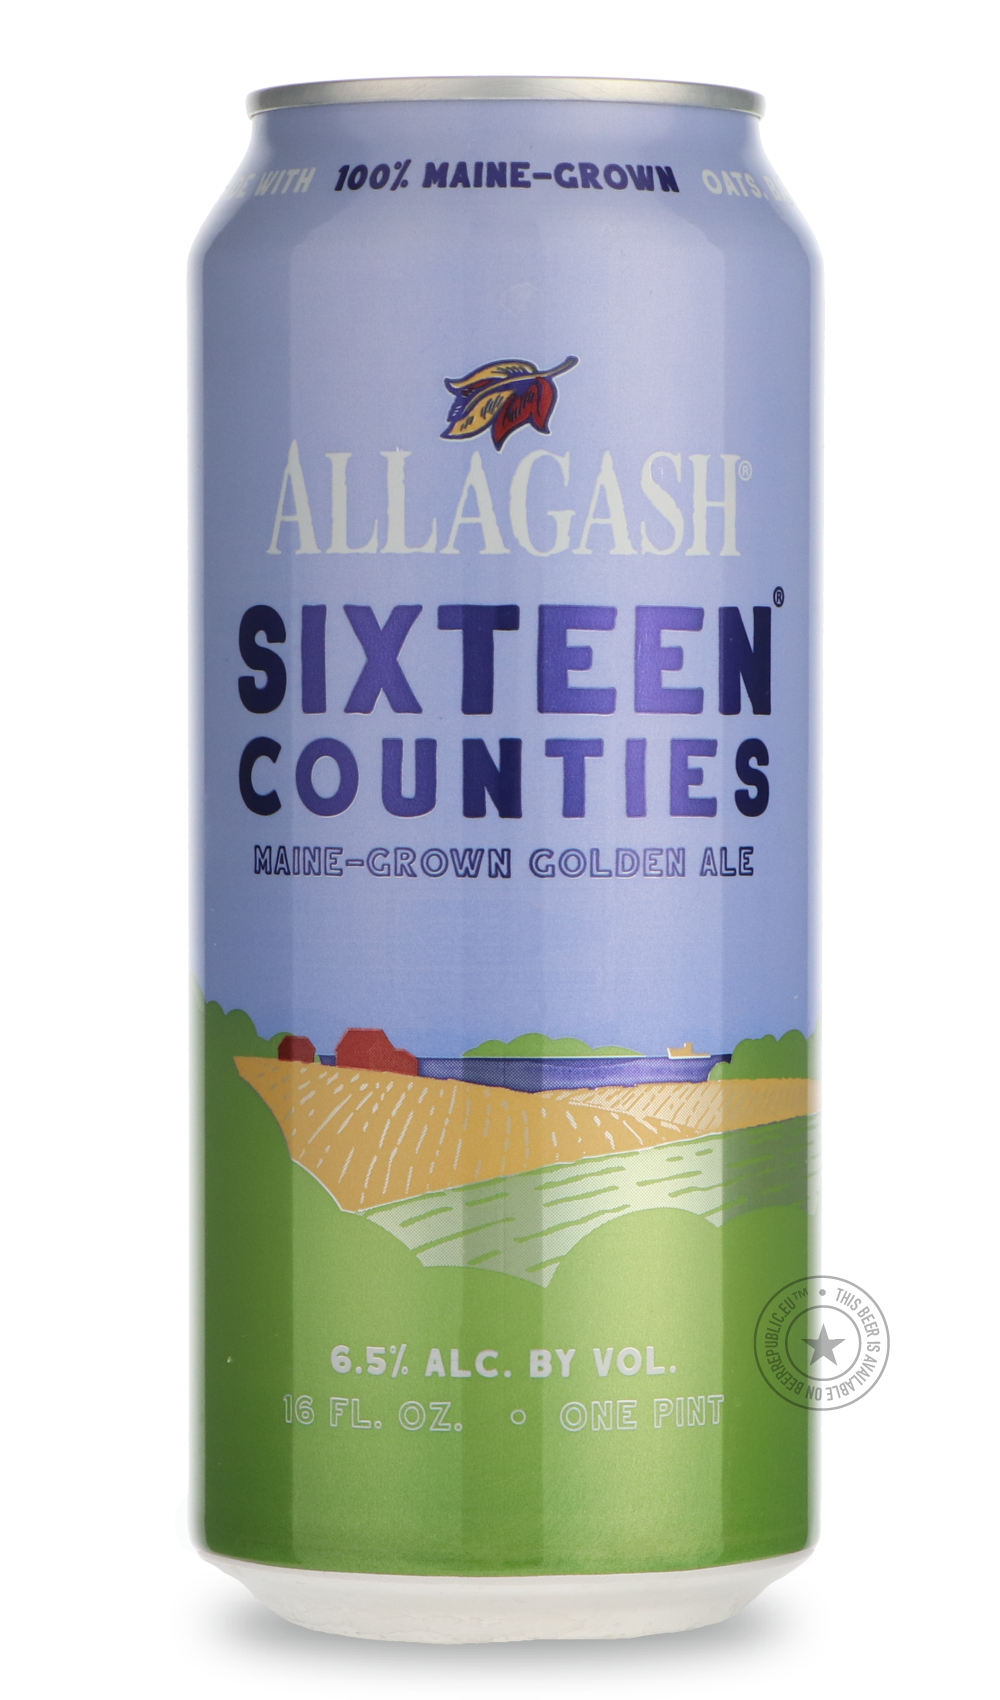 -Allagash- Sixteen Counties-Pale- Only @ Beer Republic - The best online beer store for American & Canadian craft beer - Buy beer online from the USA and Canada - Bier online kopen - Amerikaans bier kopen - Craft beer store - Craft beer kopen - Amerikanisch bier kaufen - Bier online kaufen - Acheter biere online - IPA - Stout - Porter - New England IPA - Hazy IPA - Imperial Stout - Barrel Aged - Barrel Aged Imperial Stout - Brown - Dark beer - Blond - Blonde - Pilsner - Lager - Wheat - Weizen - Amber - Barl